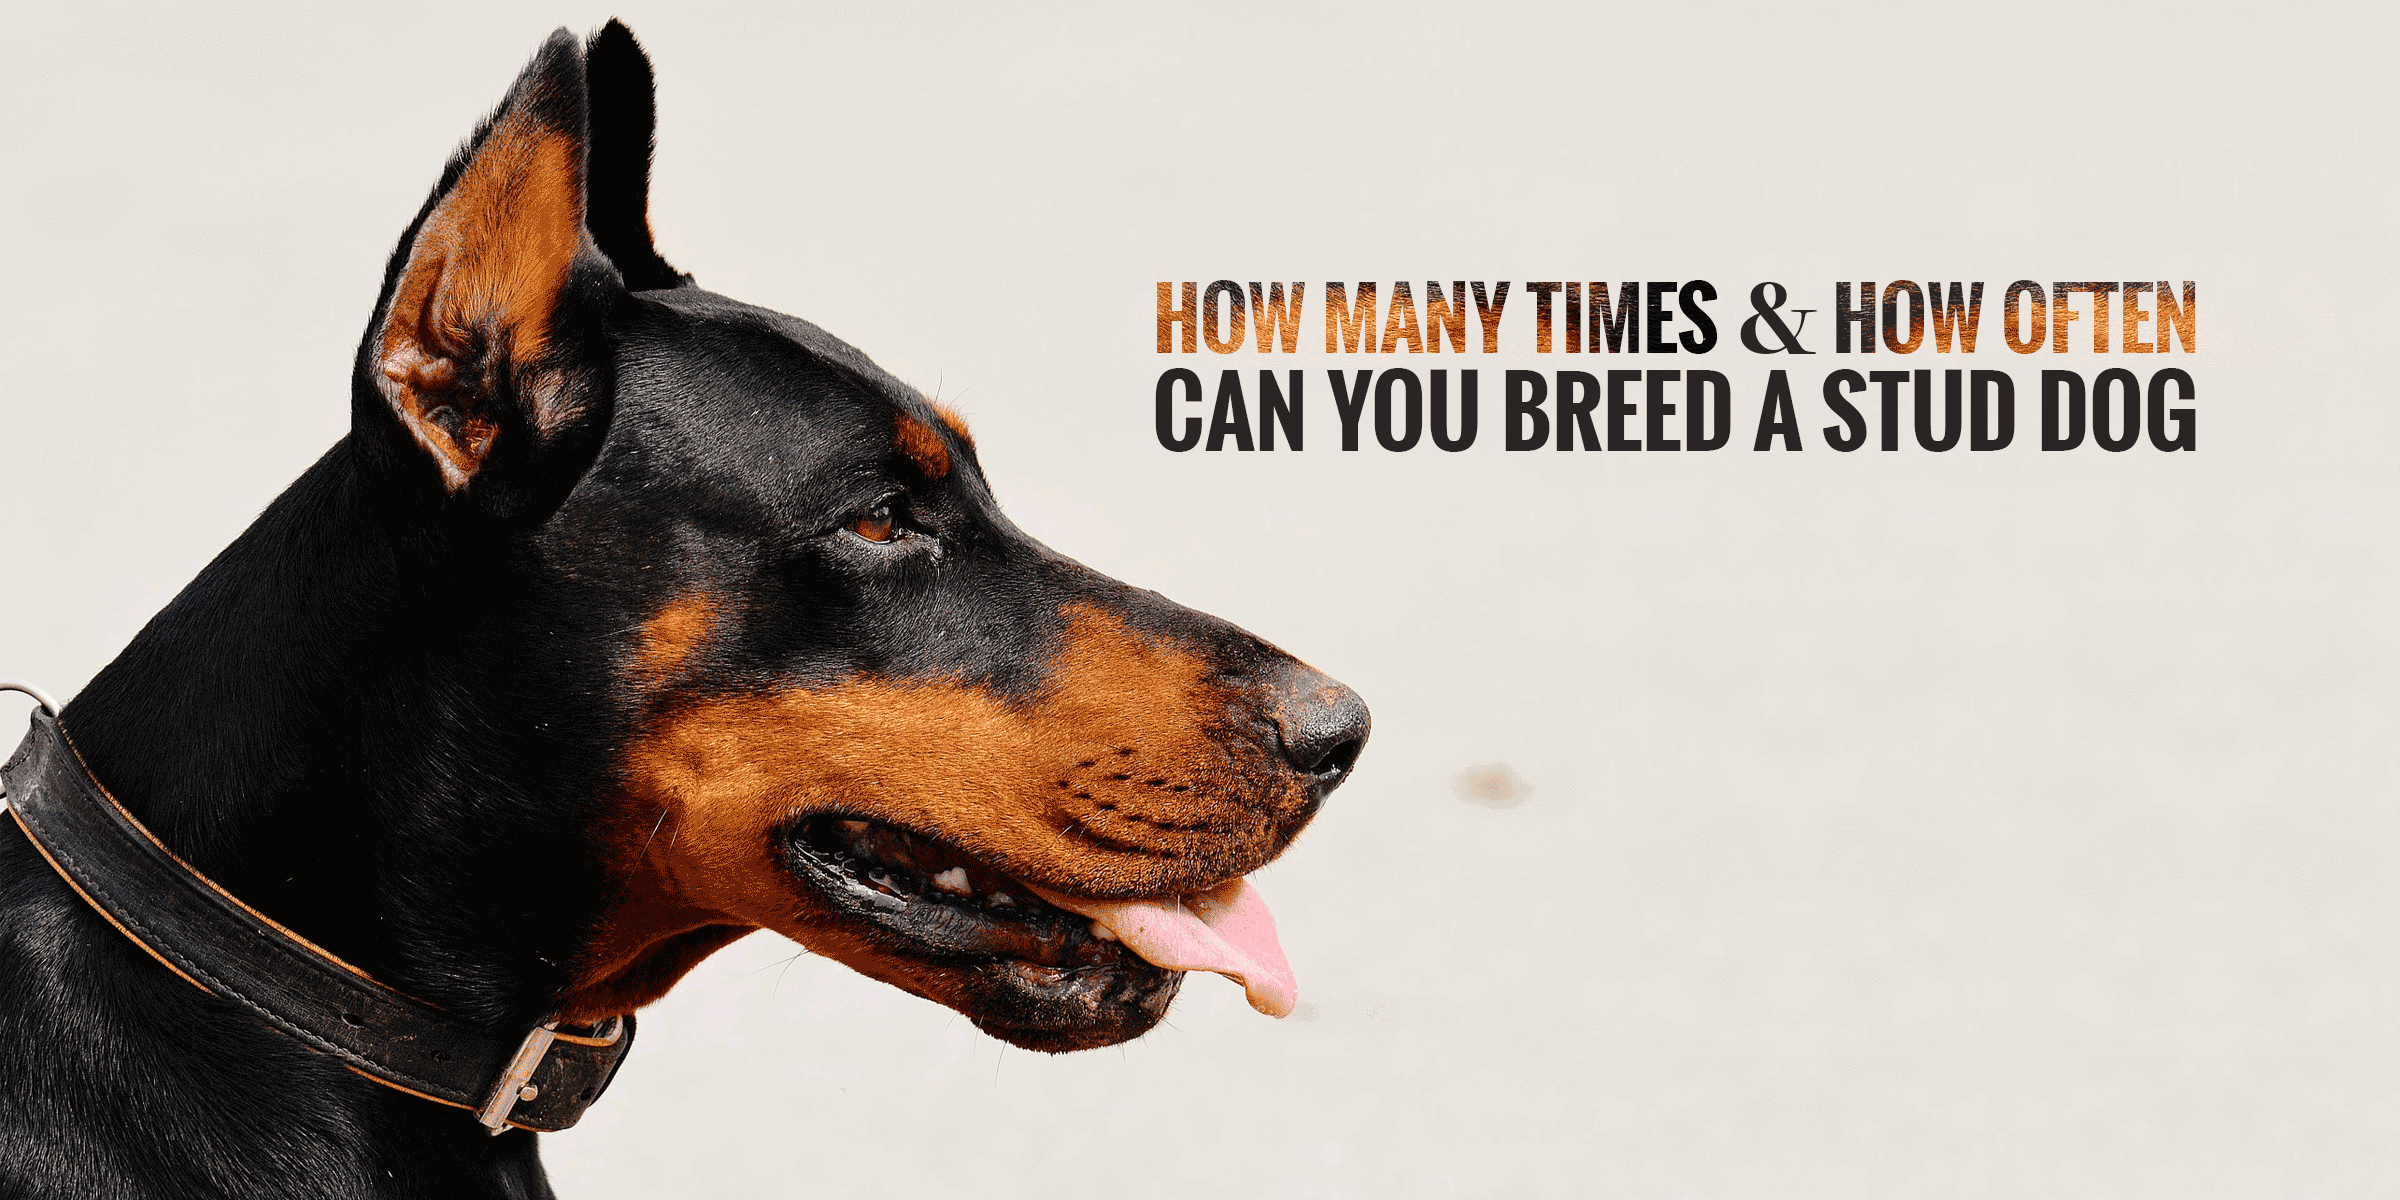 How Many Times Can You Breed a Male Dog?